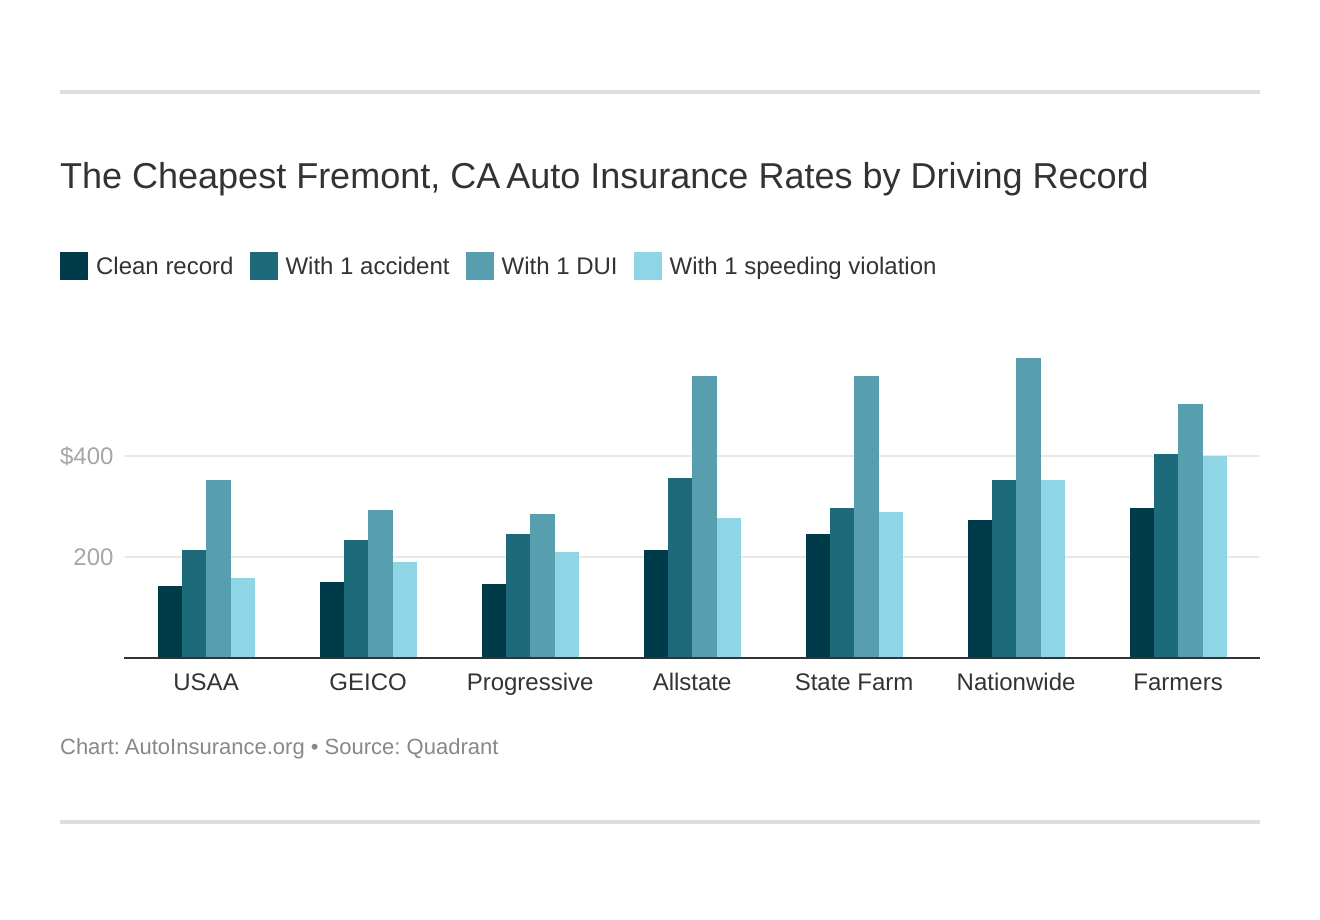 The Cheapest Fremont, CA Auto Insurance Rates by Driving Record